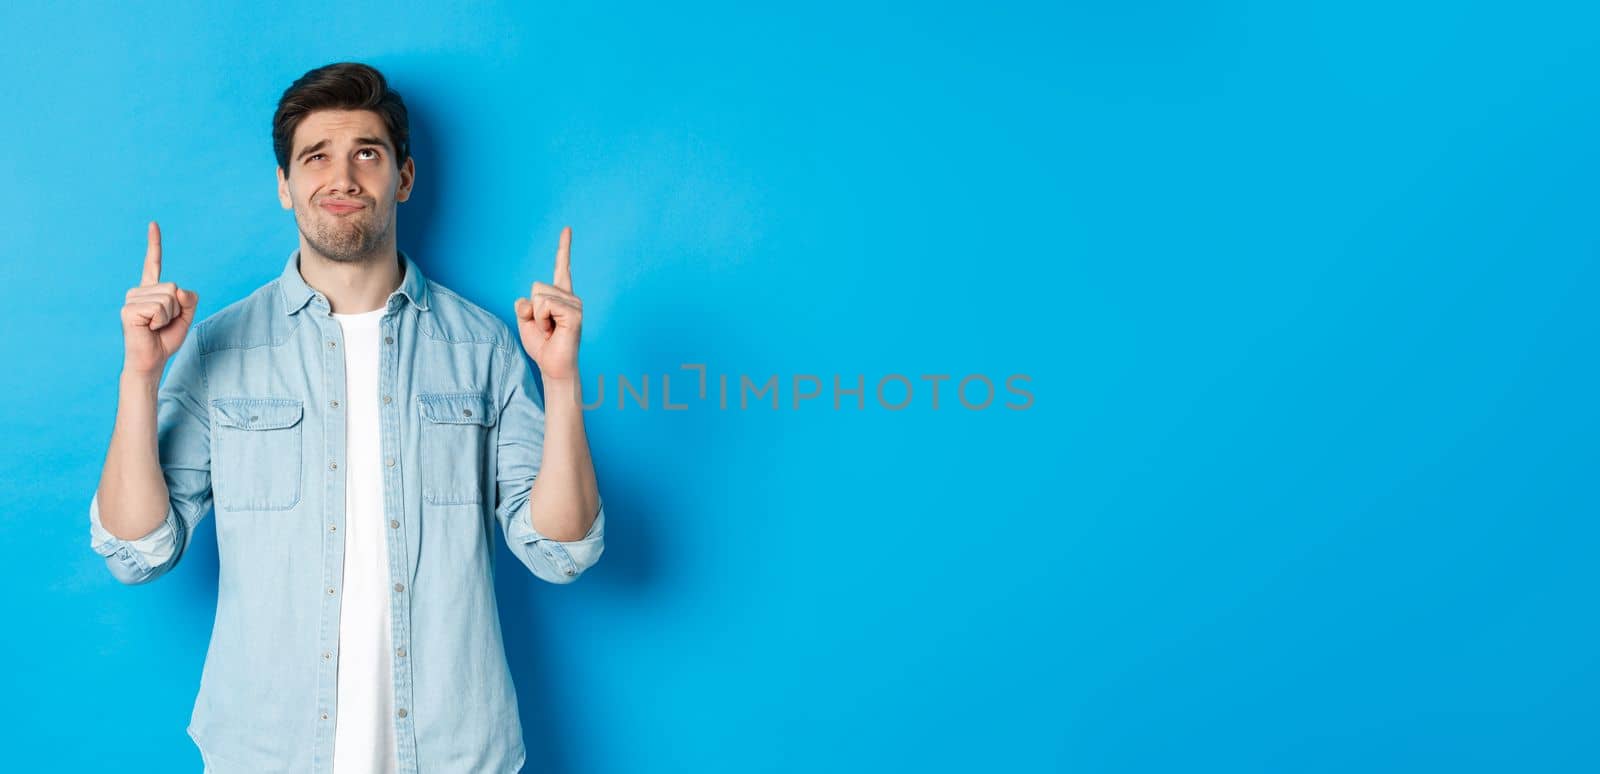 Portrait of doubtful adult man looking disappointed, pointing fingers up at something with uncertain face, standing over blue background.